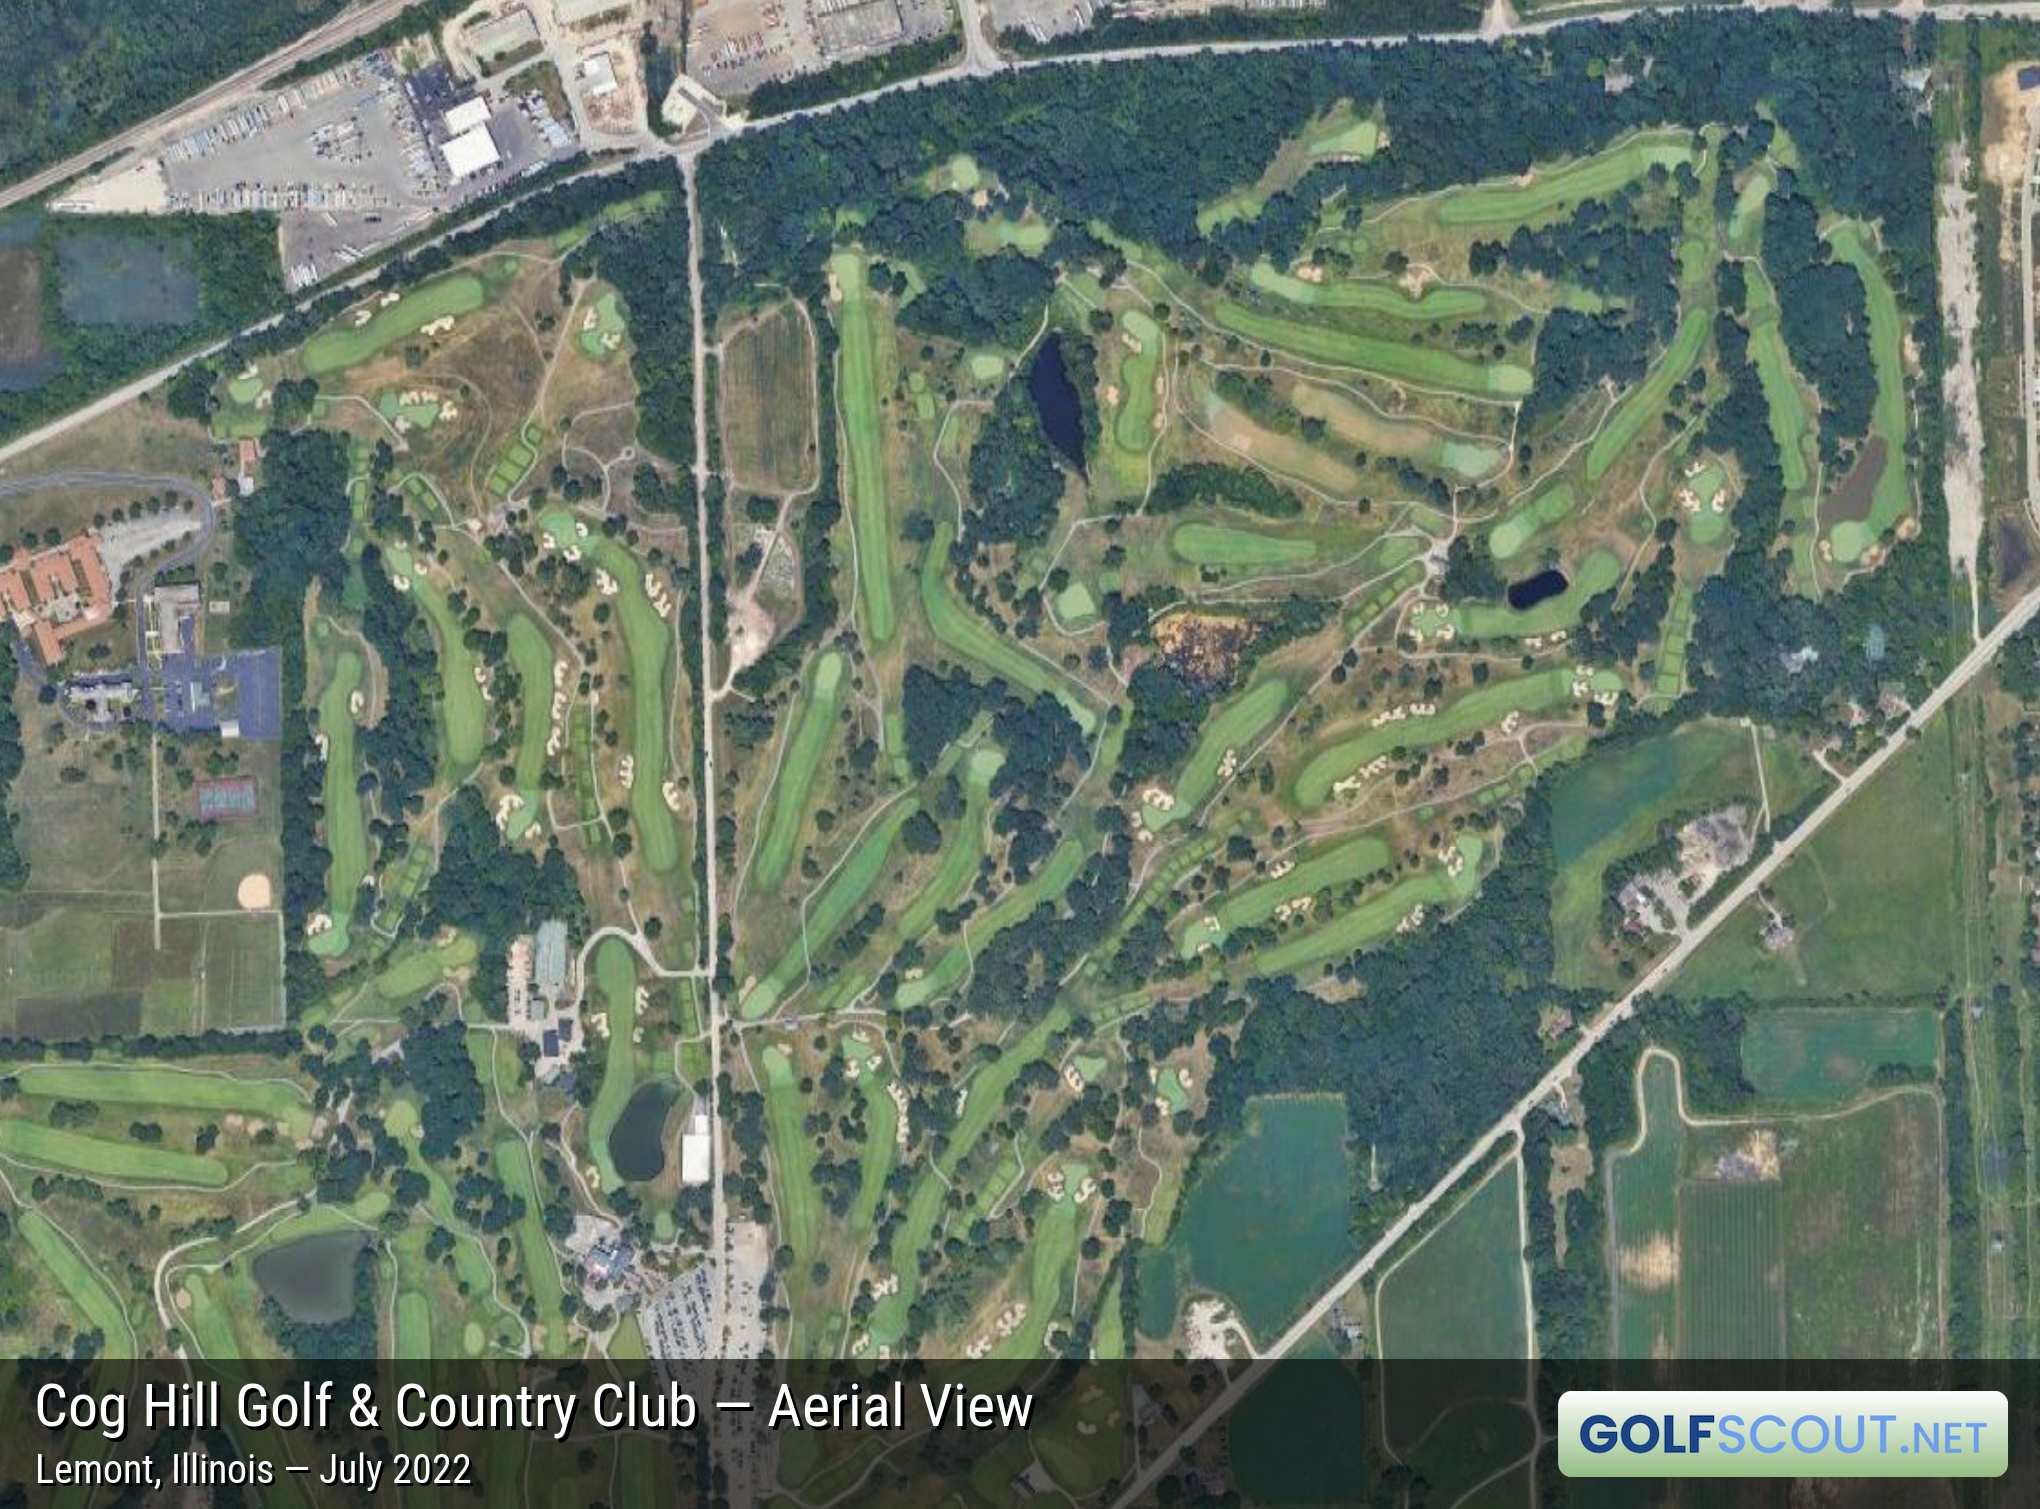 Aerial satellite imagery of Cog Hill Course #4 - Dubsdread in Palos Park, Illinois. This image is zoomed in on the northeast area of Cog Hill where Courses 2 (Ravines) and 4 (Dubsdread) are located. Image courtesy of Google Maps.